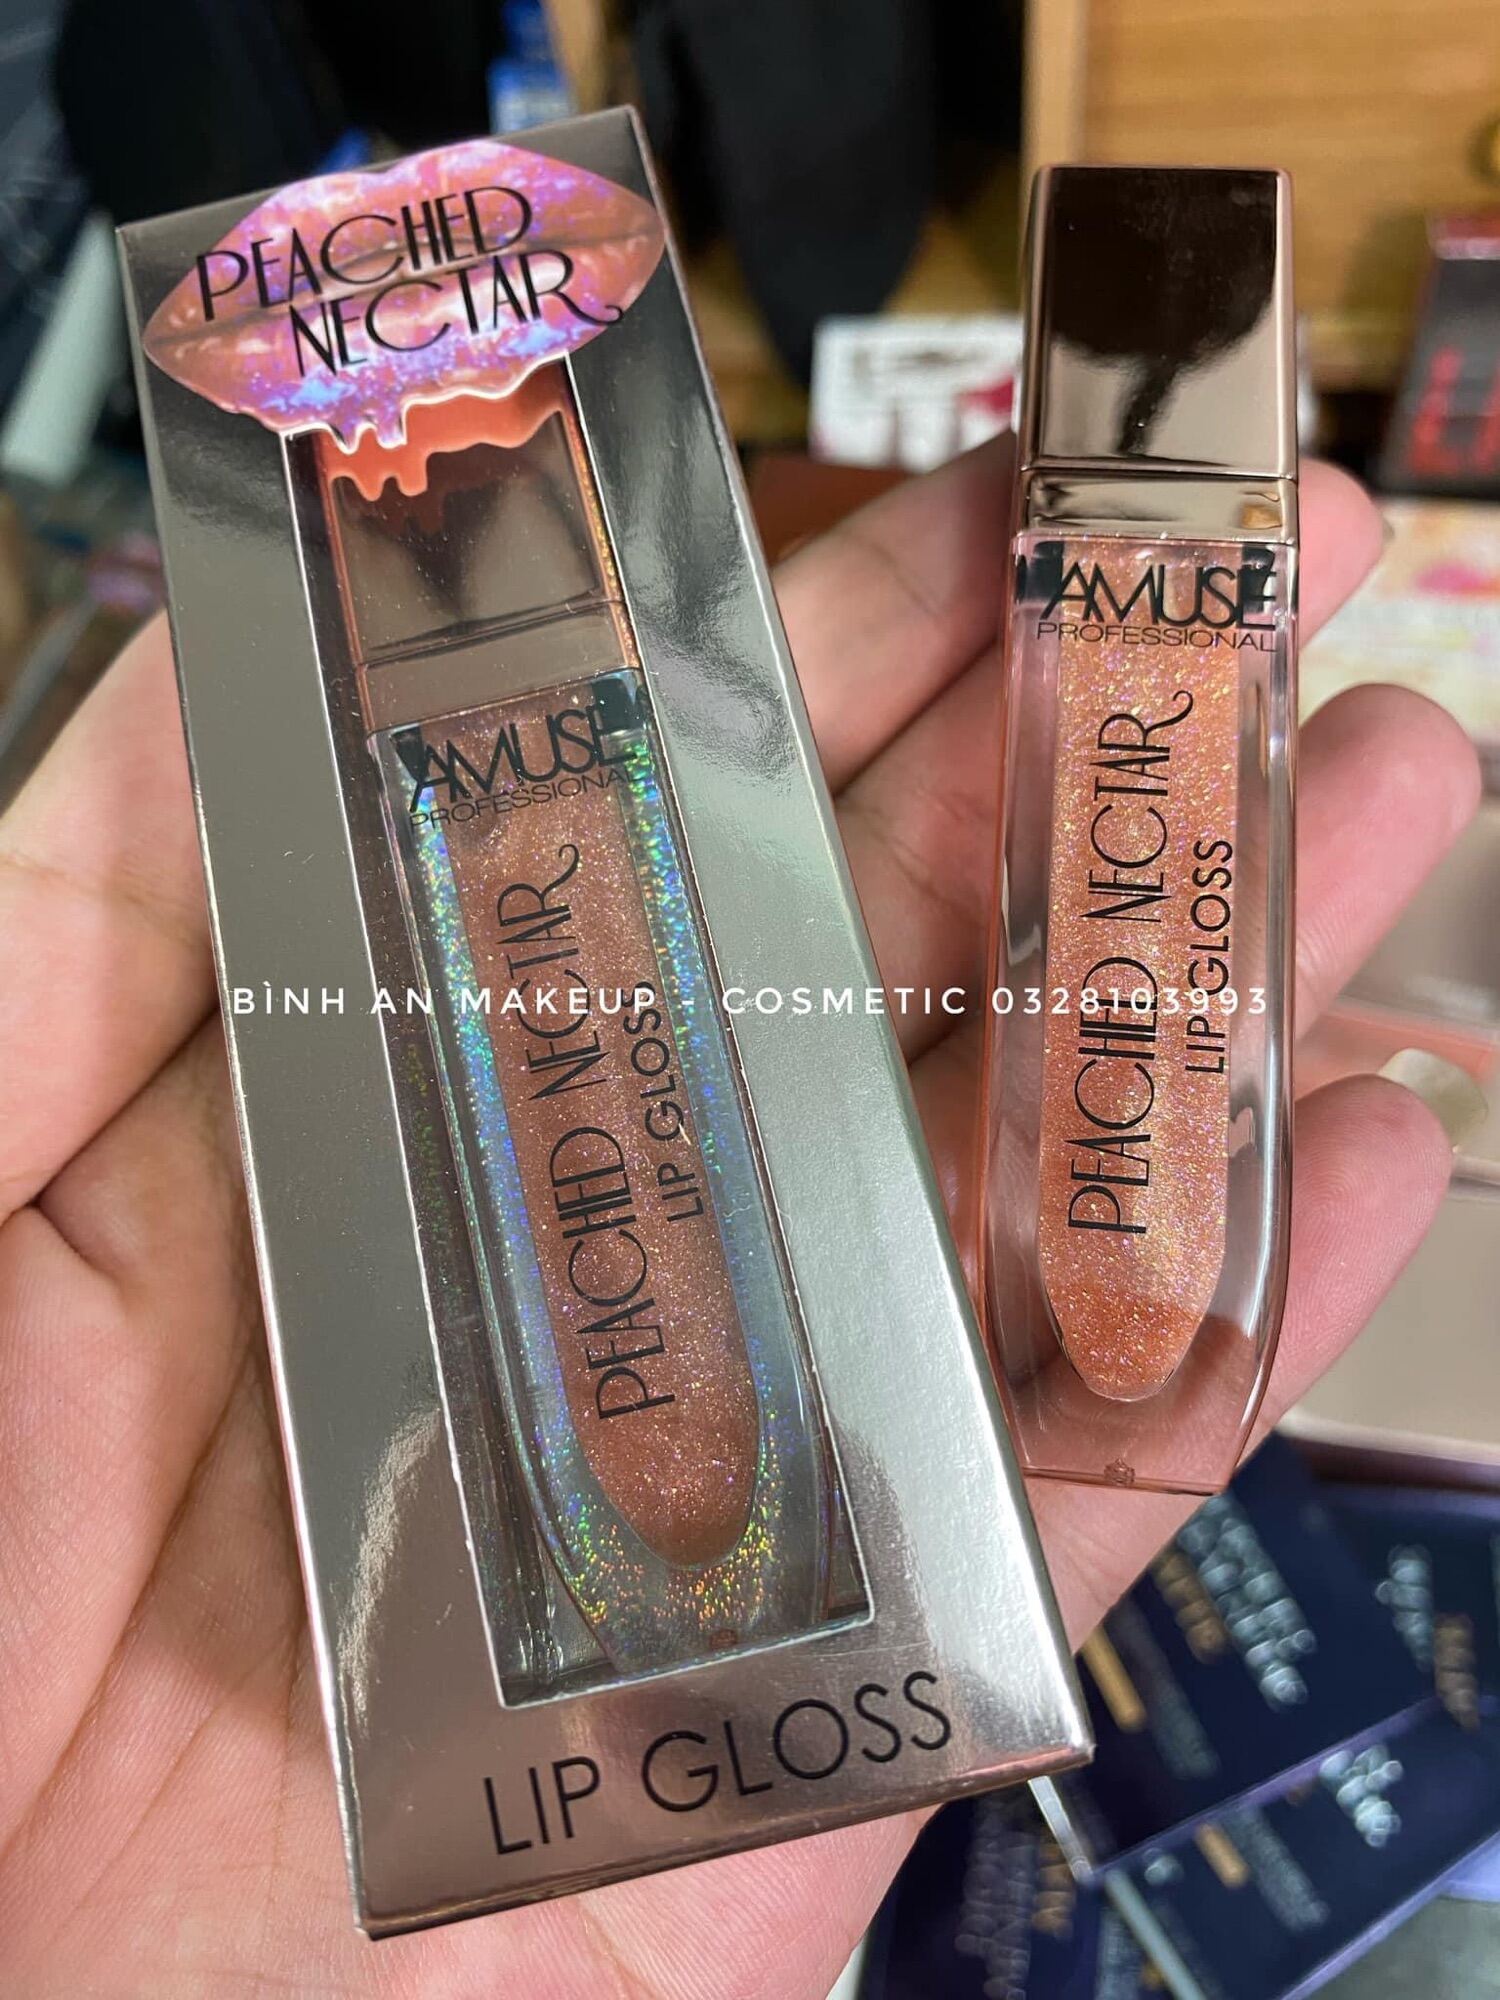 Son bóng trong suốt Peached Nectar Lip Gloss